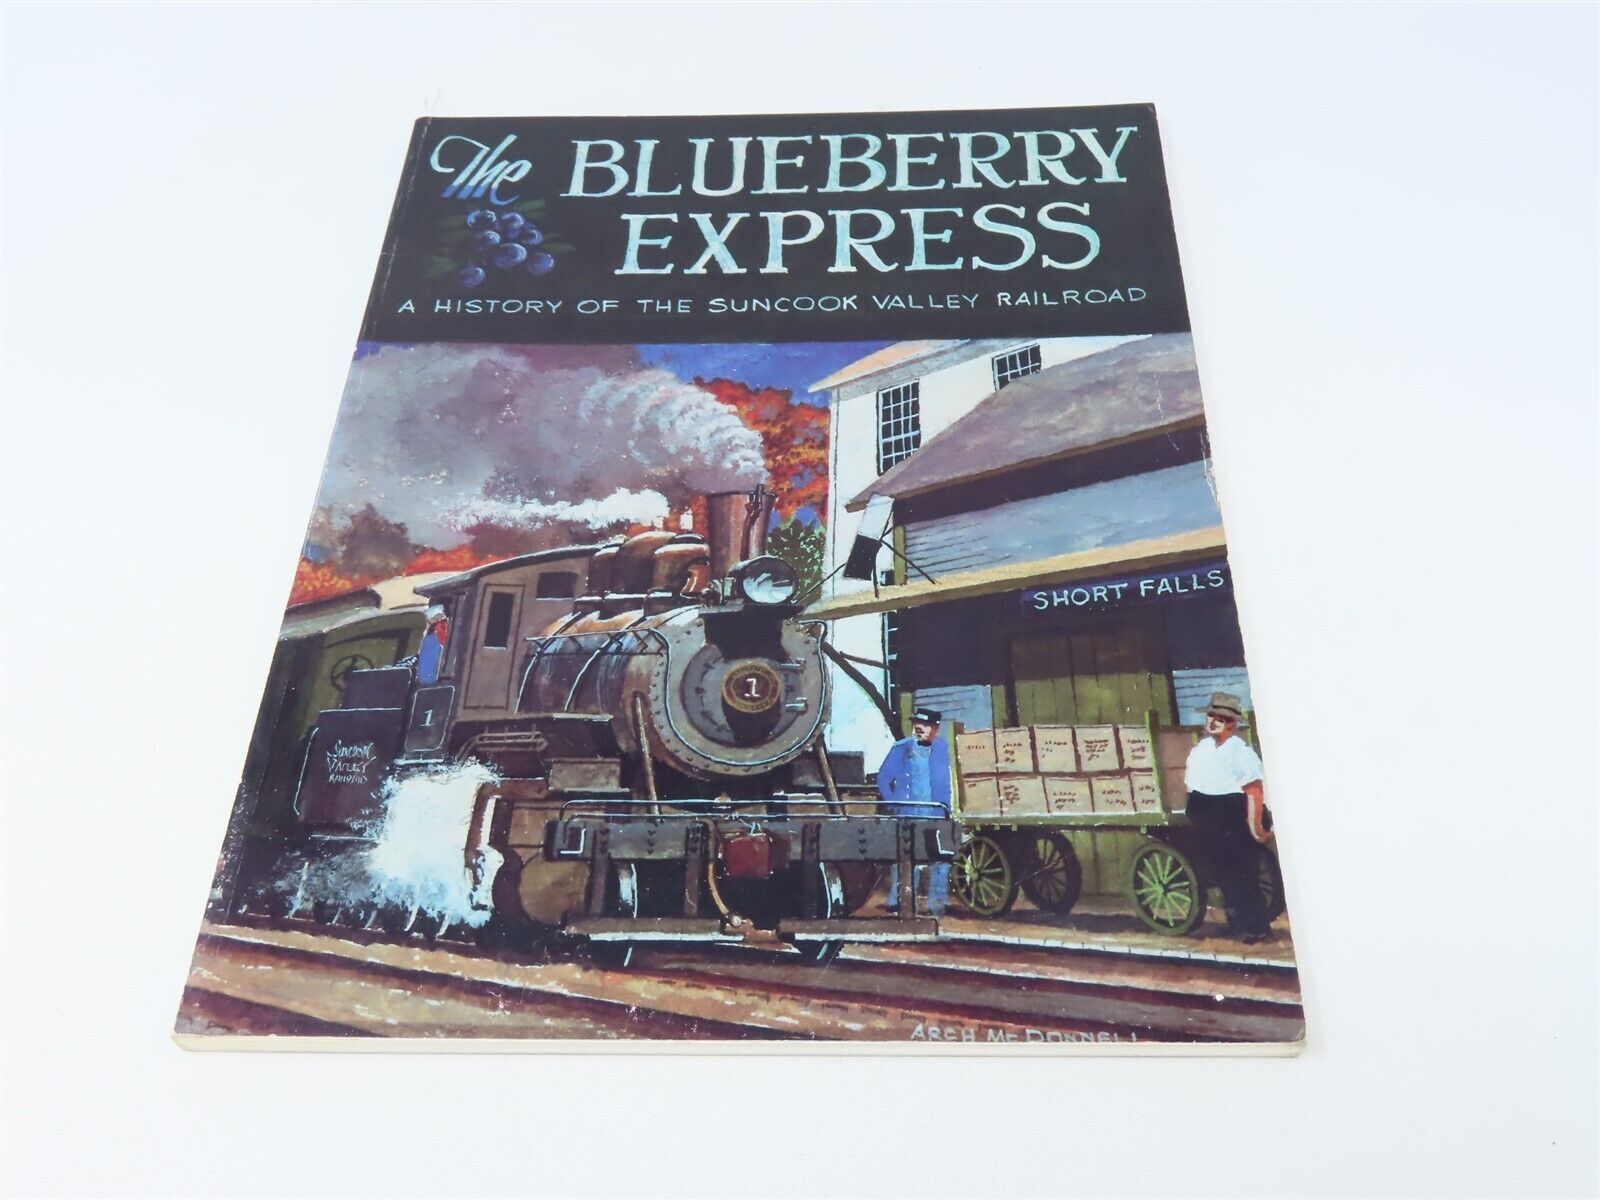 The Blueberry Express by John C. Hutchins ©1985 SC Book